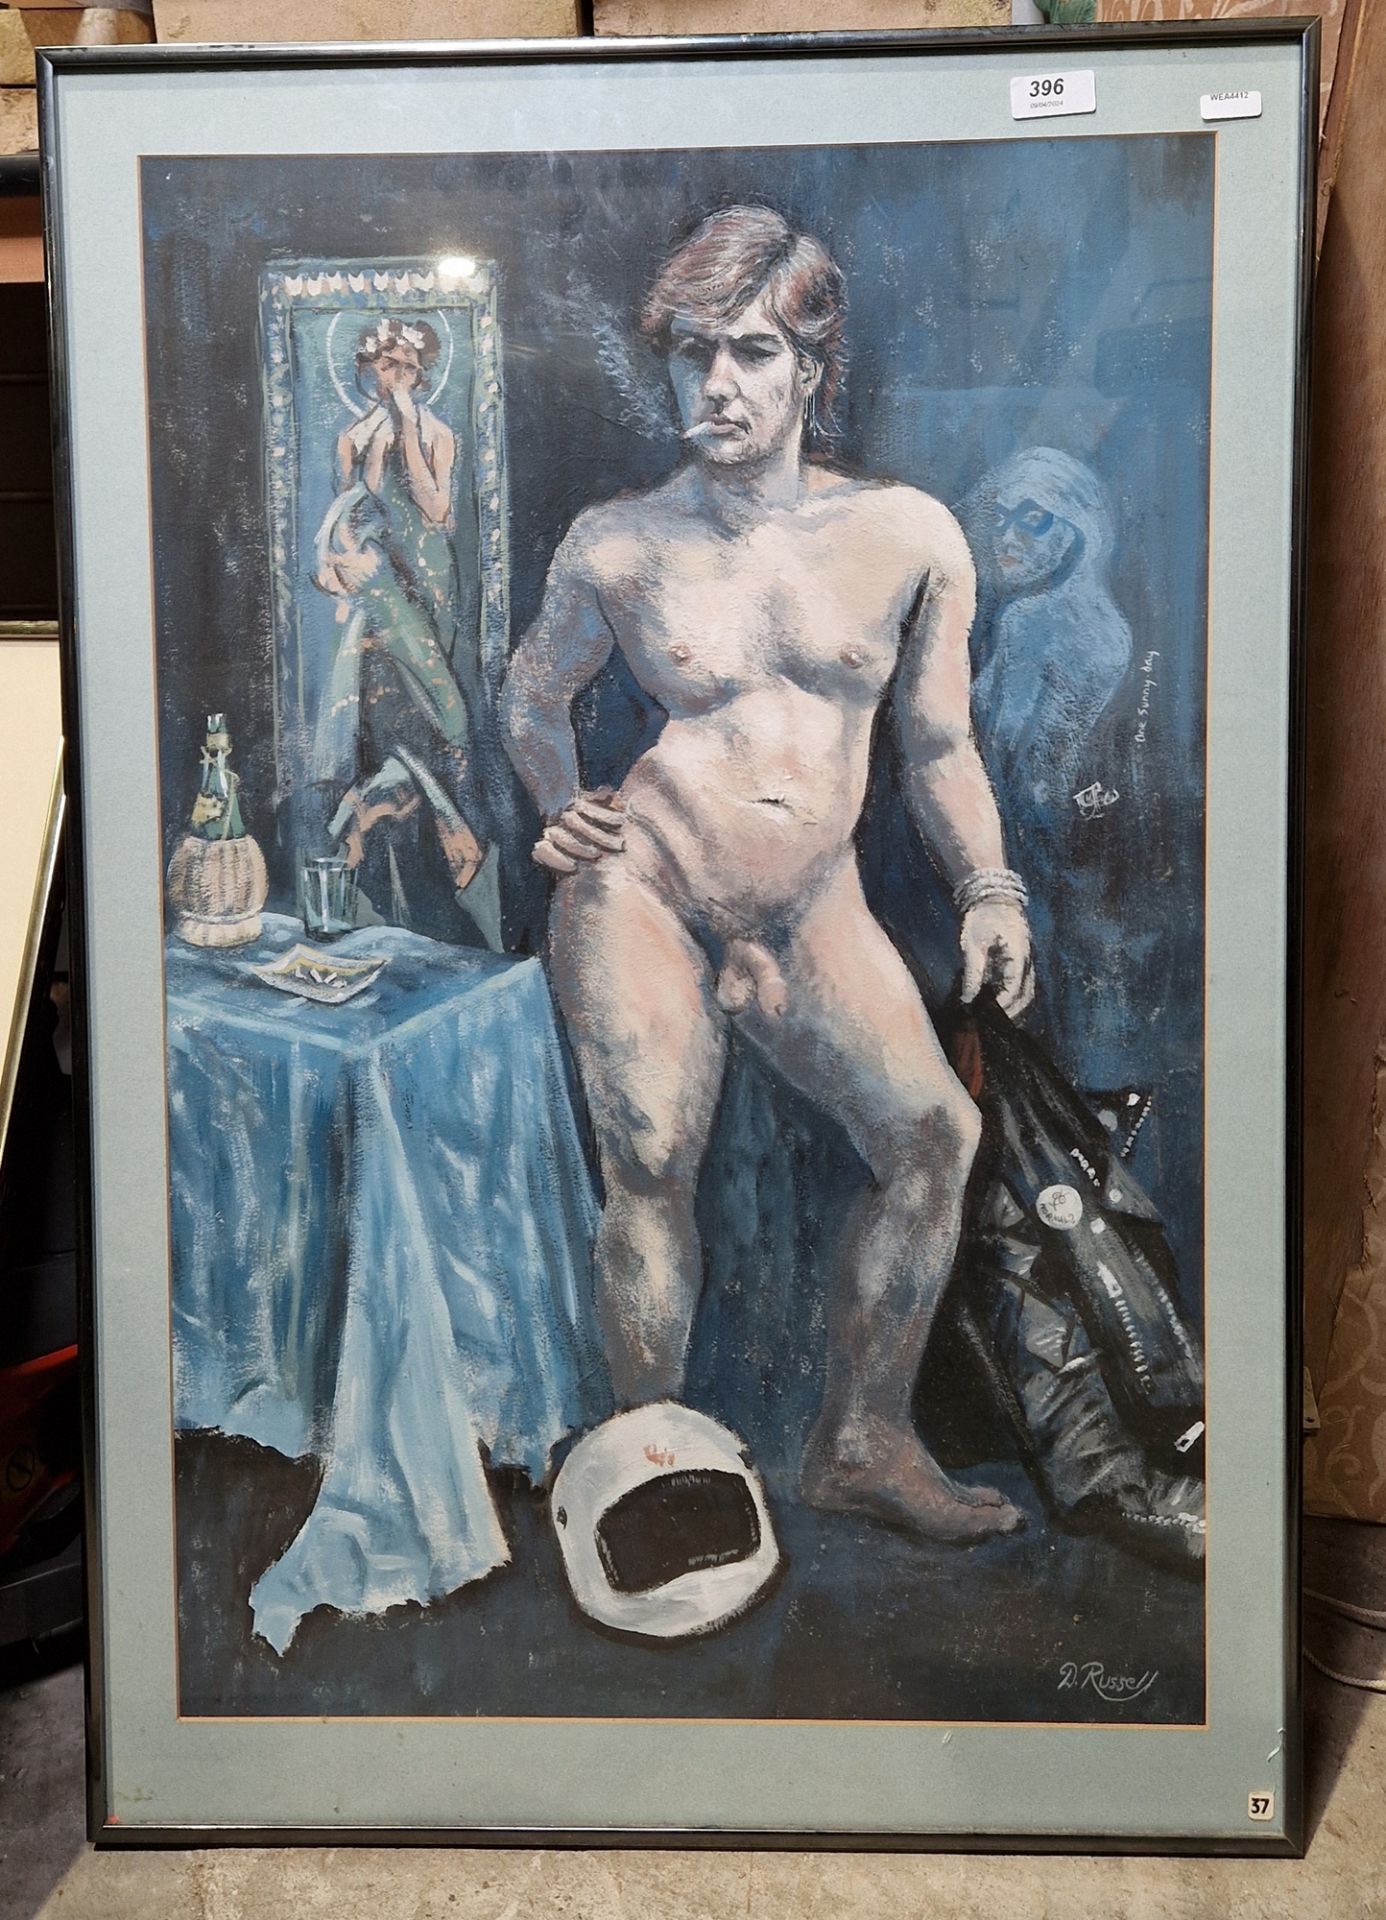 Derrick Russell (20th century) Acrylic on card "One Sunny Day", portrait of a nude male, signed - Image 2 of 3